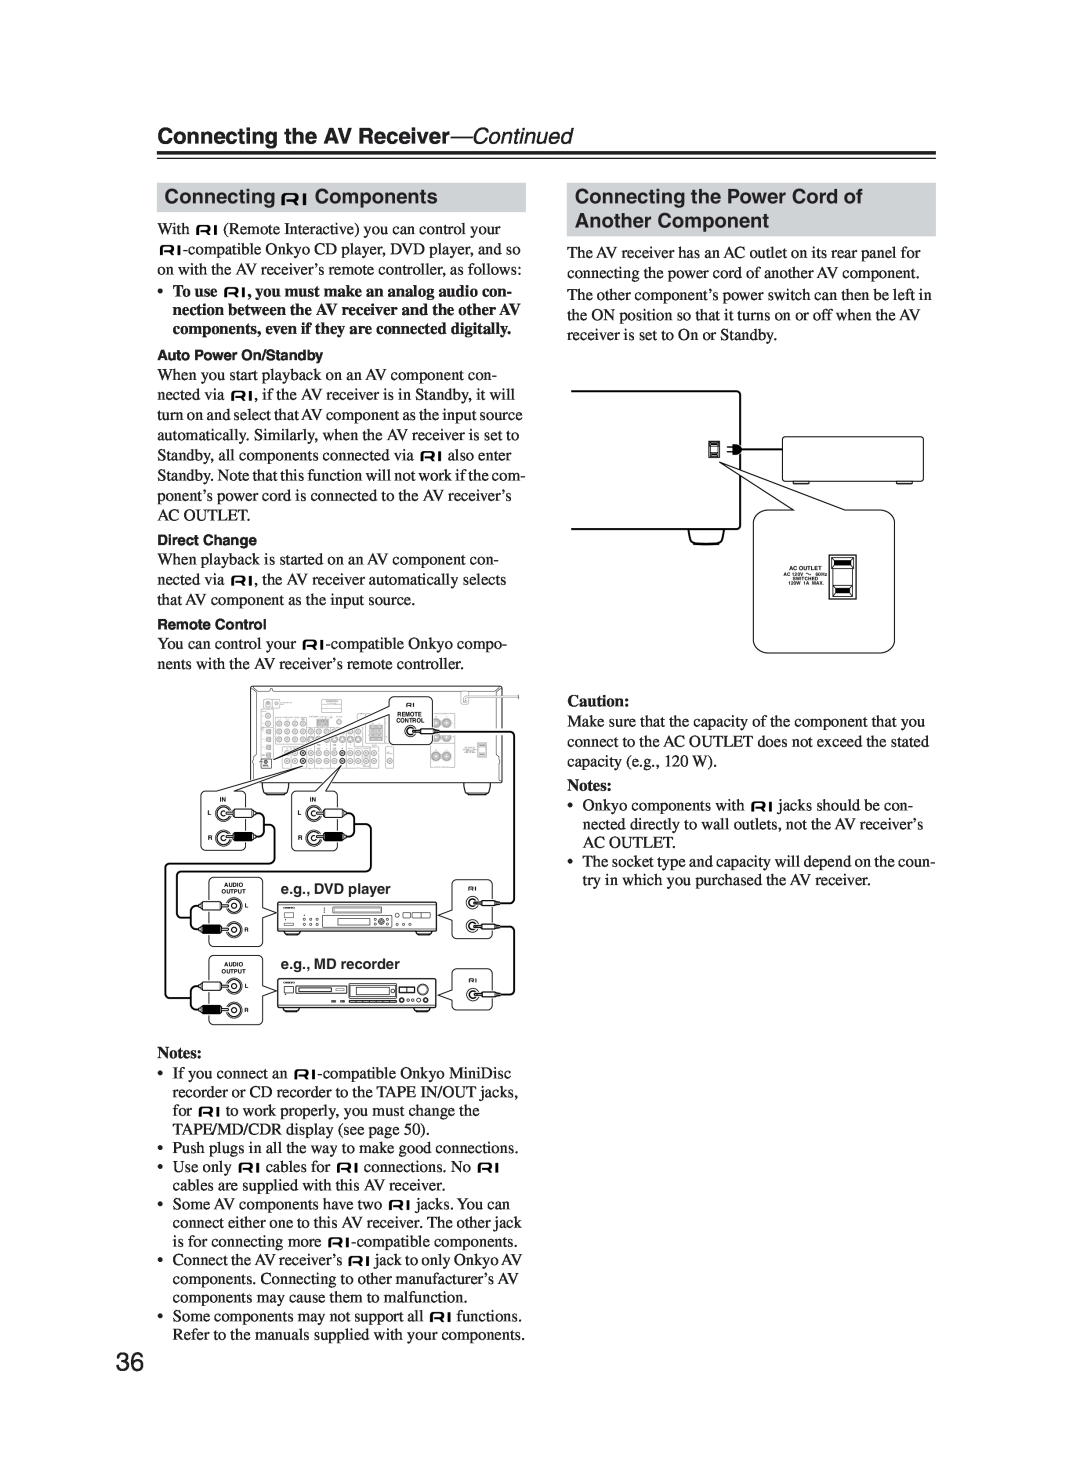 Onkyo TX-SR603X instruction manual Connecting Components, Connecting the Power Cord of Another Component, Notes 